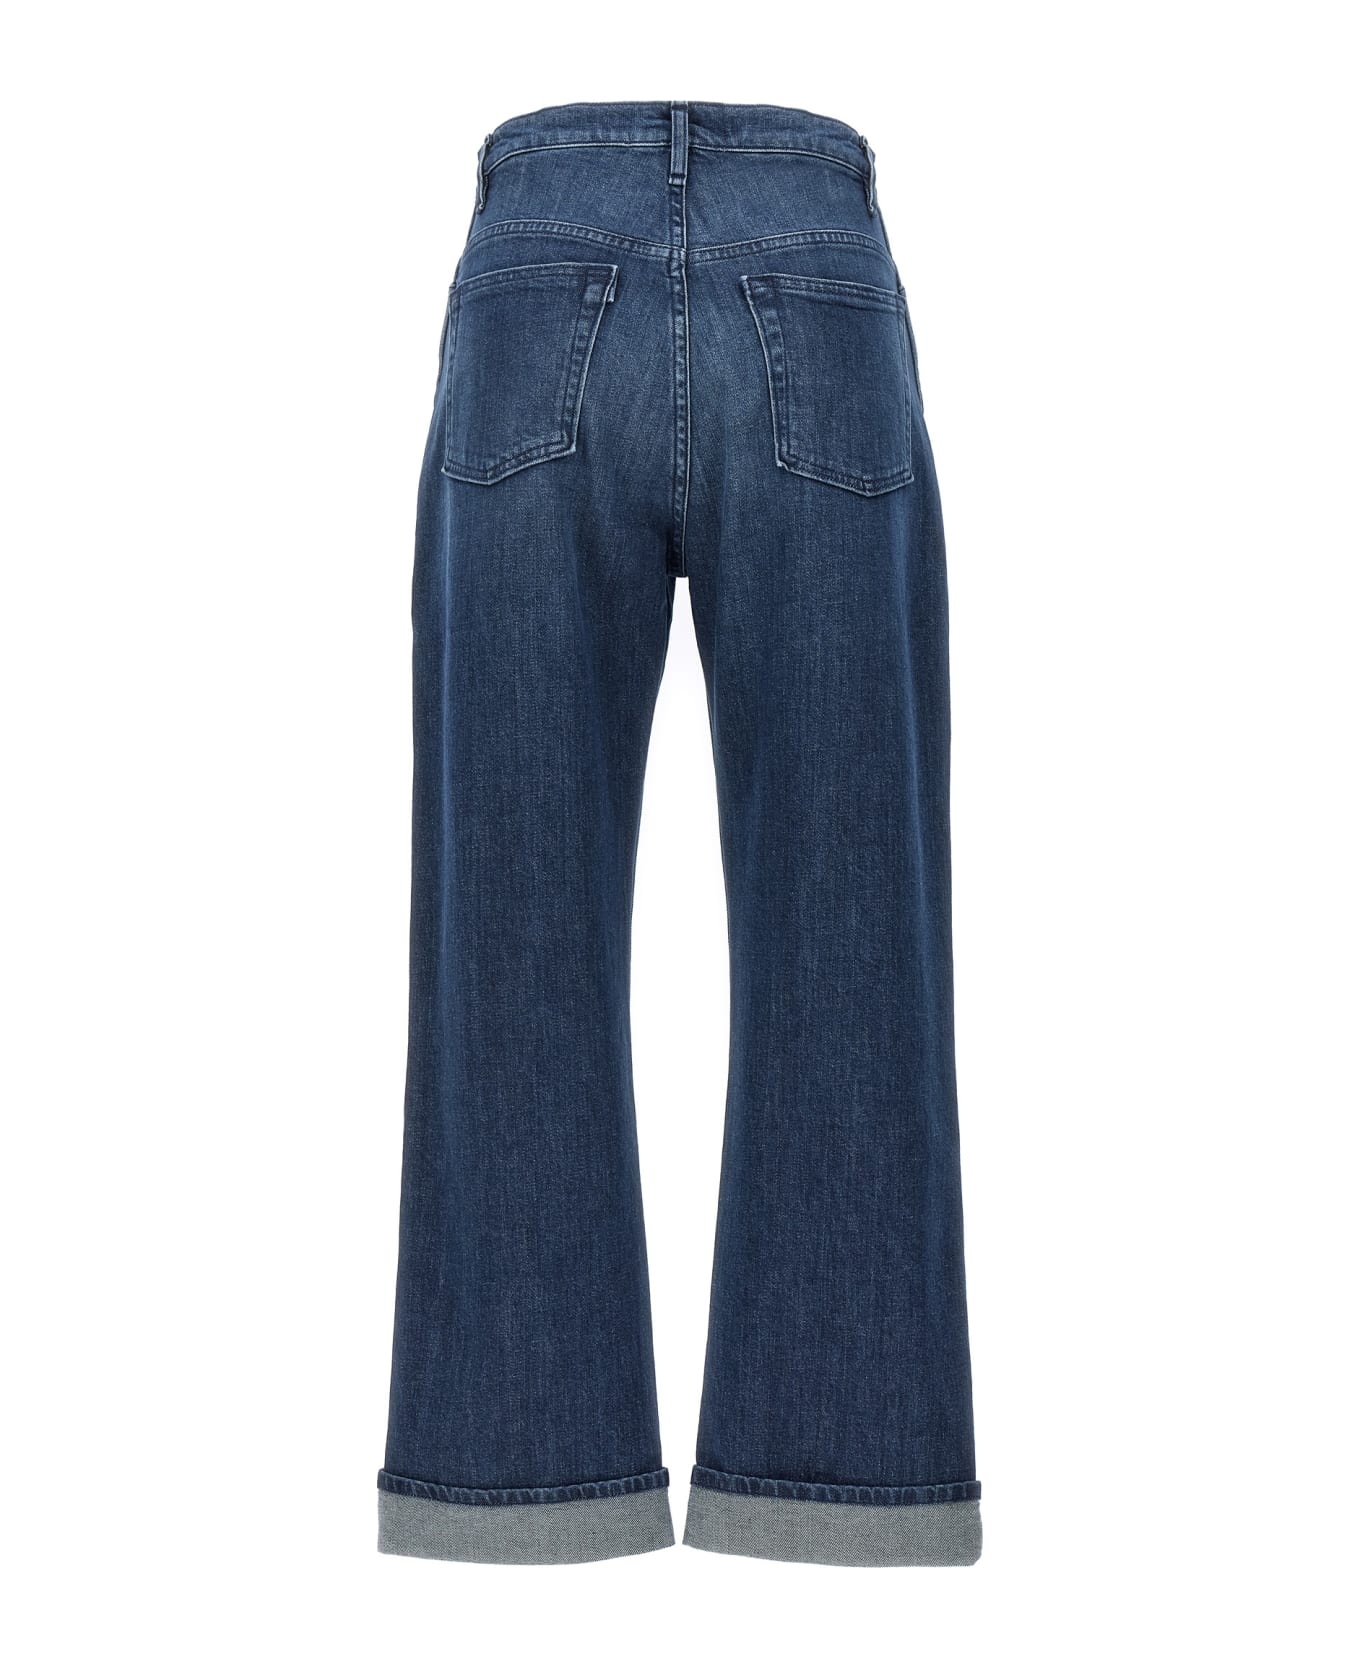 3x1 'claudia Extreme' Jeans - Blue